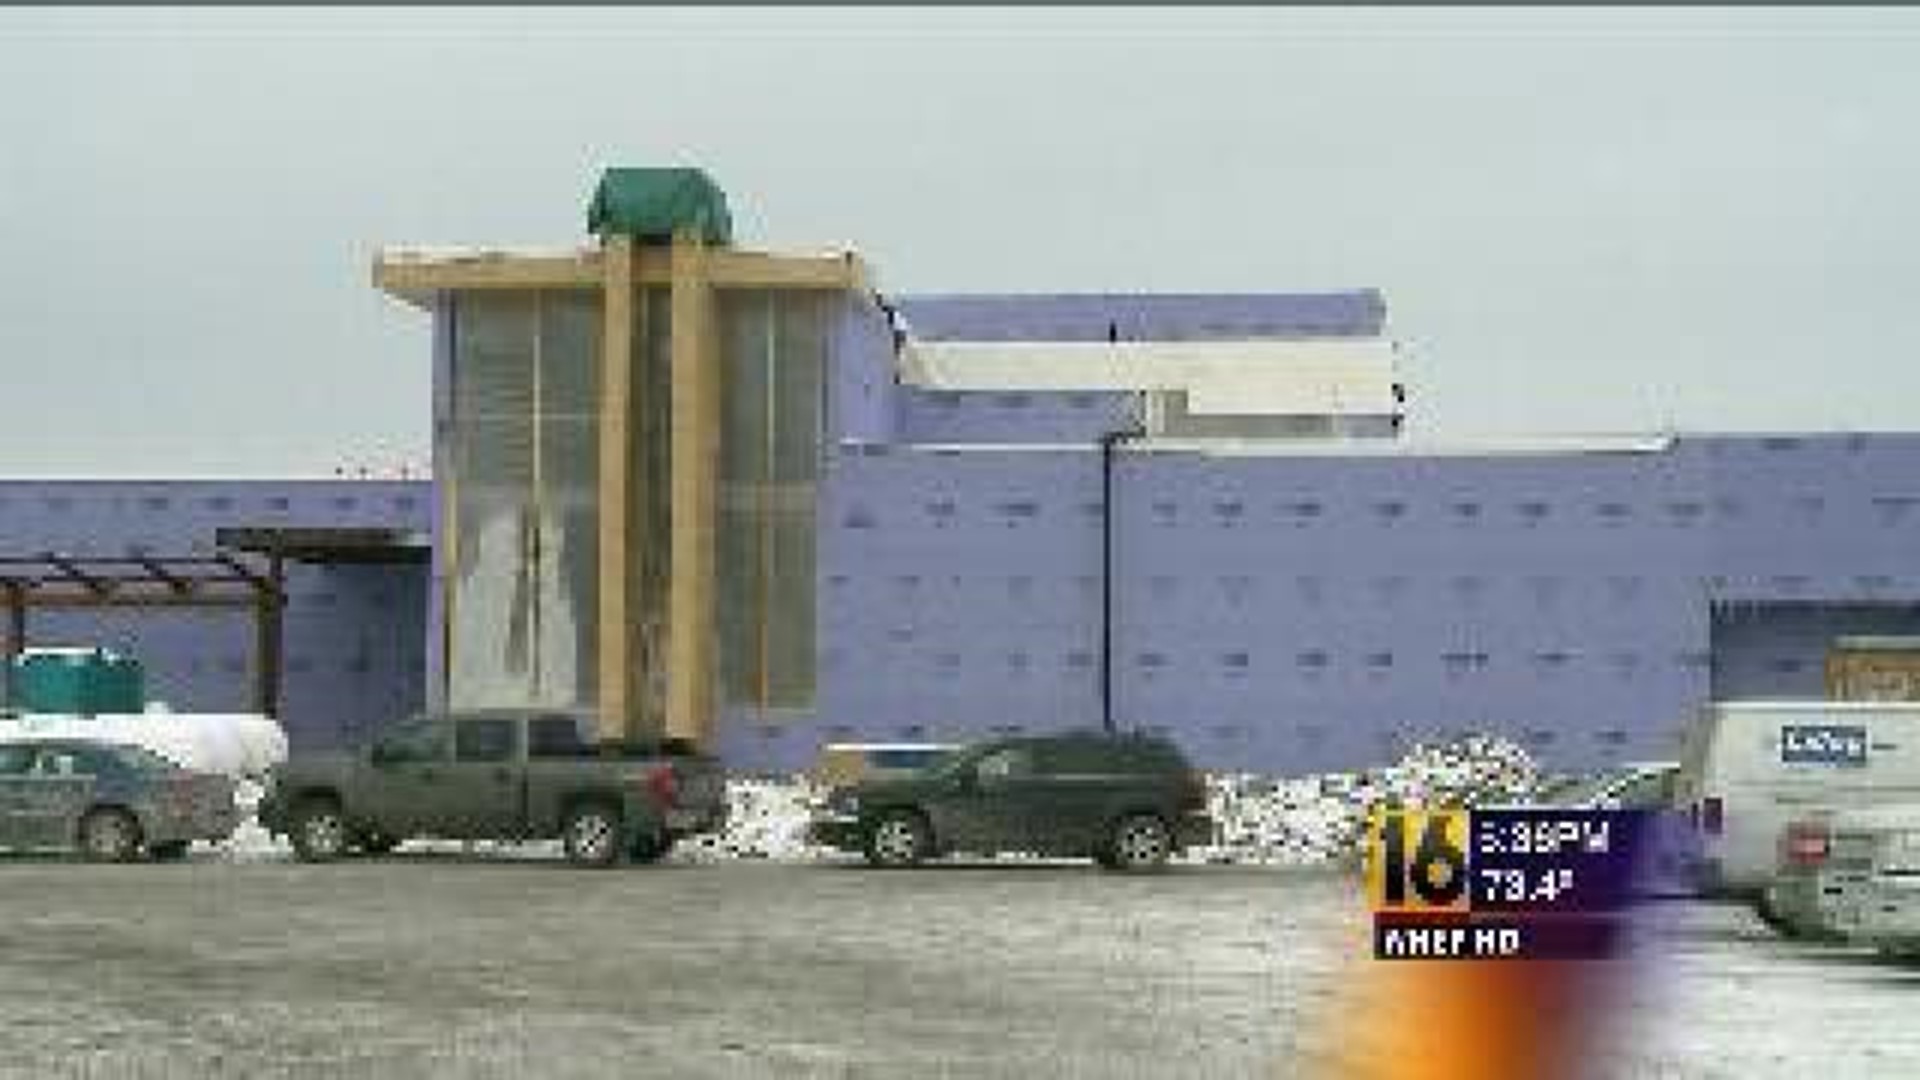 Hospital Scheduled to Open One Month Behind Schedule